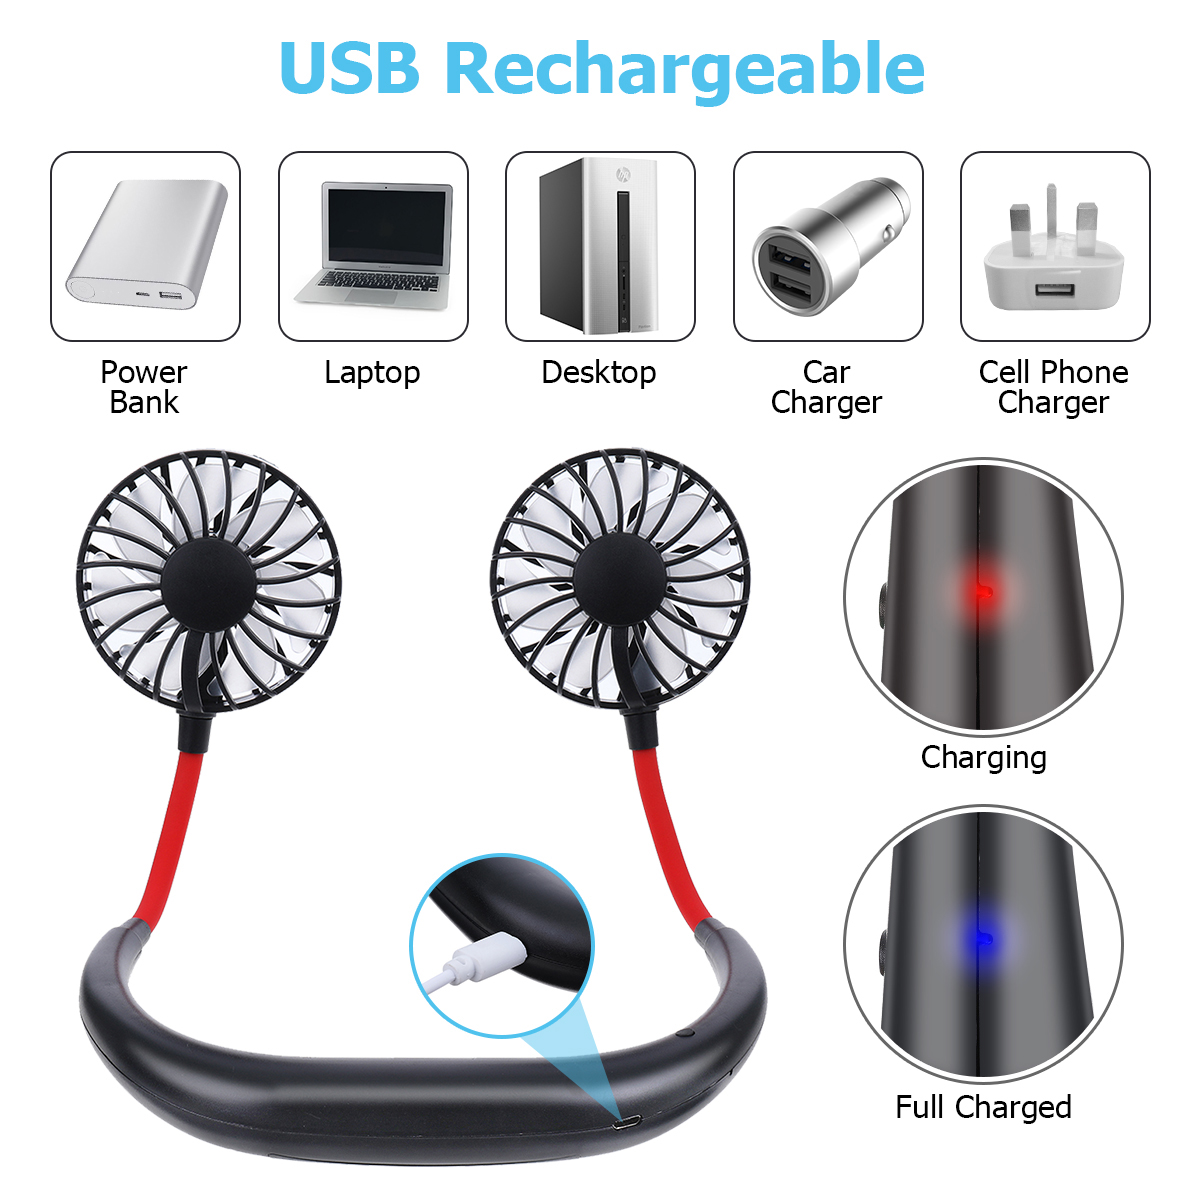 Portable-Mini-Fan-Neckband-Lazy-Neck-Hanging-Style-Cooling-Air-USB-Rechargeable-1942333-7